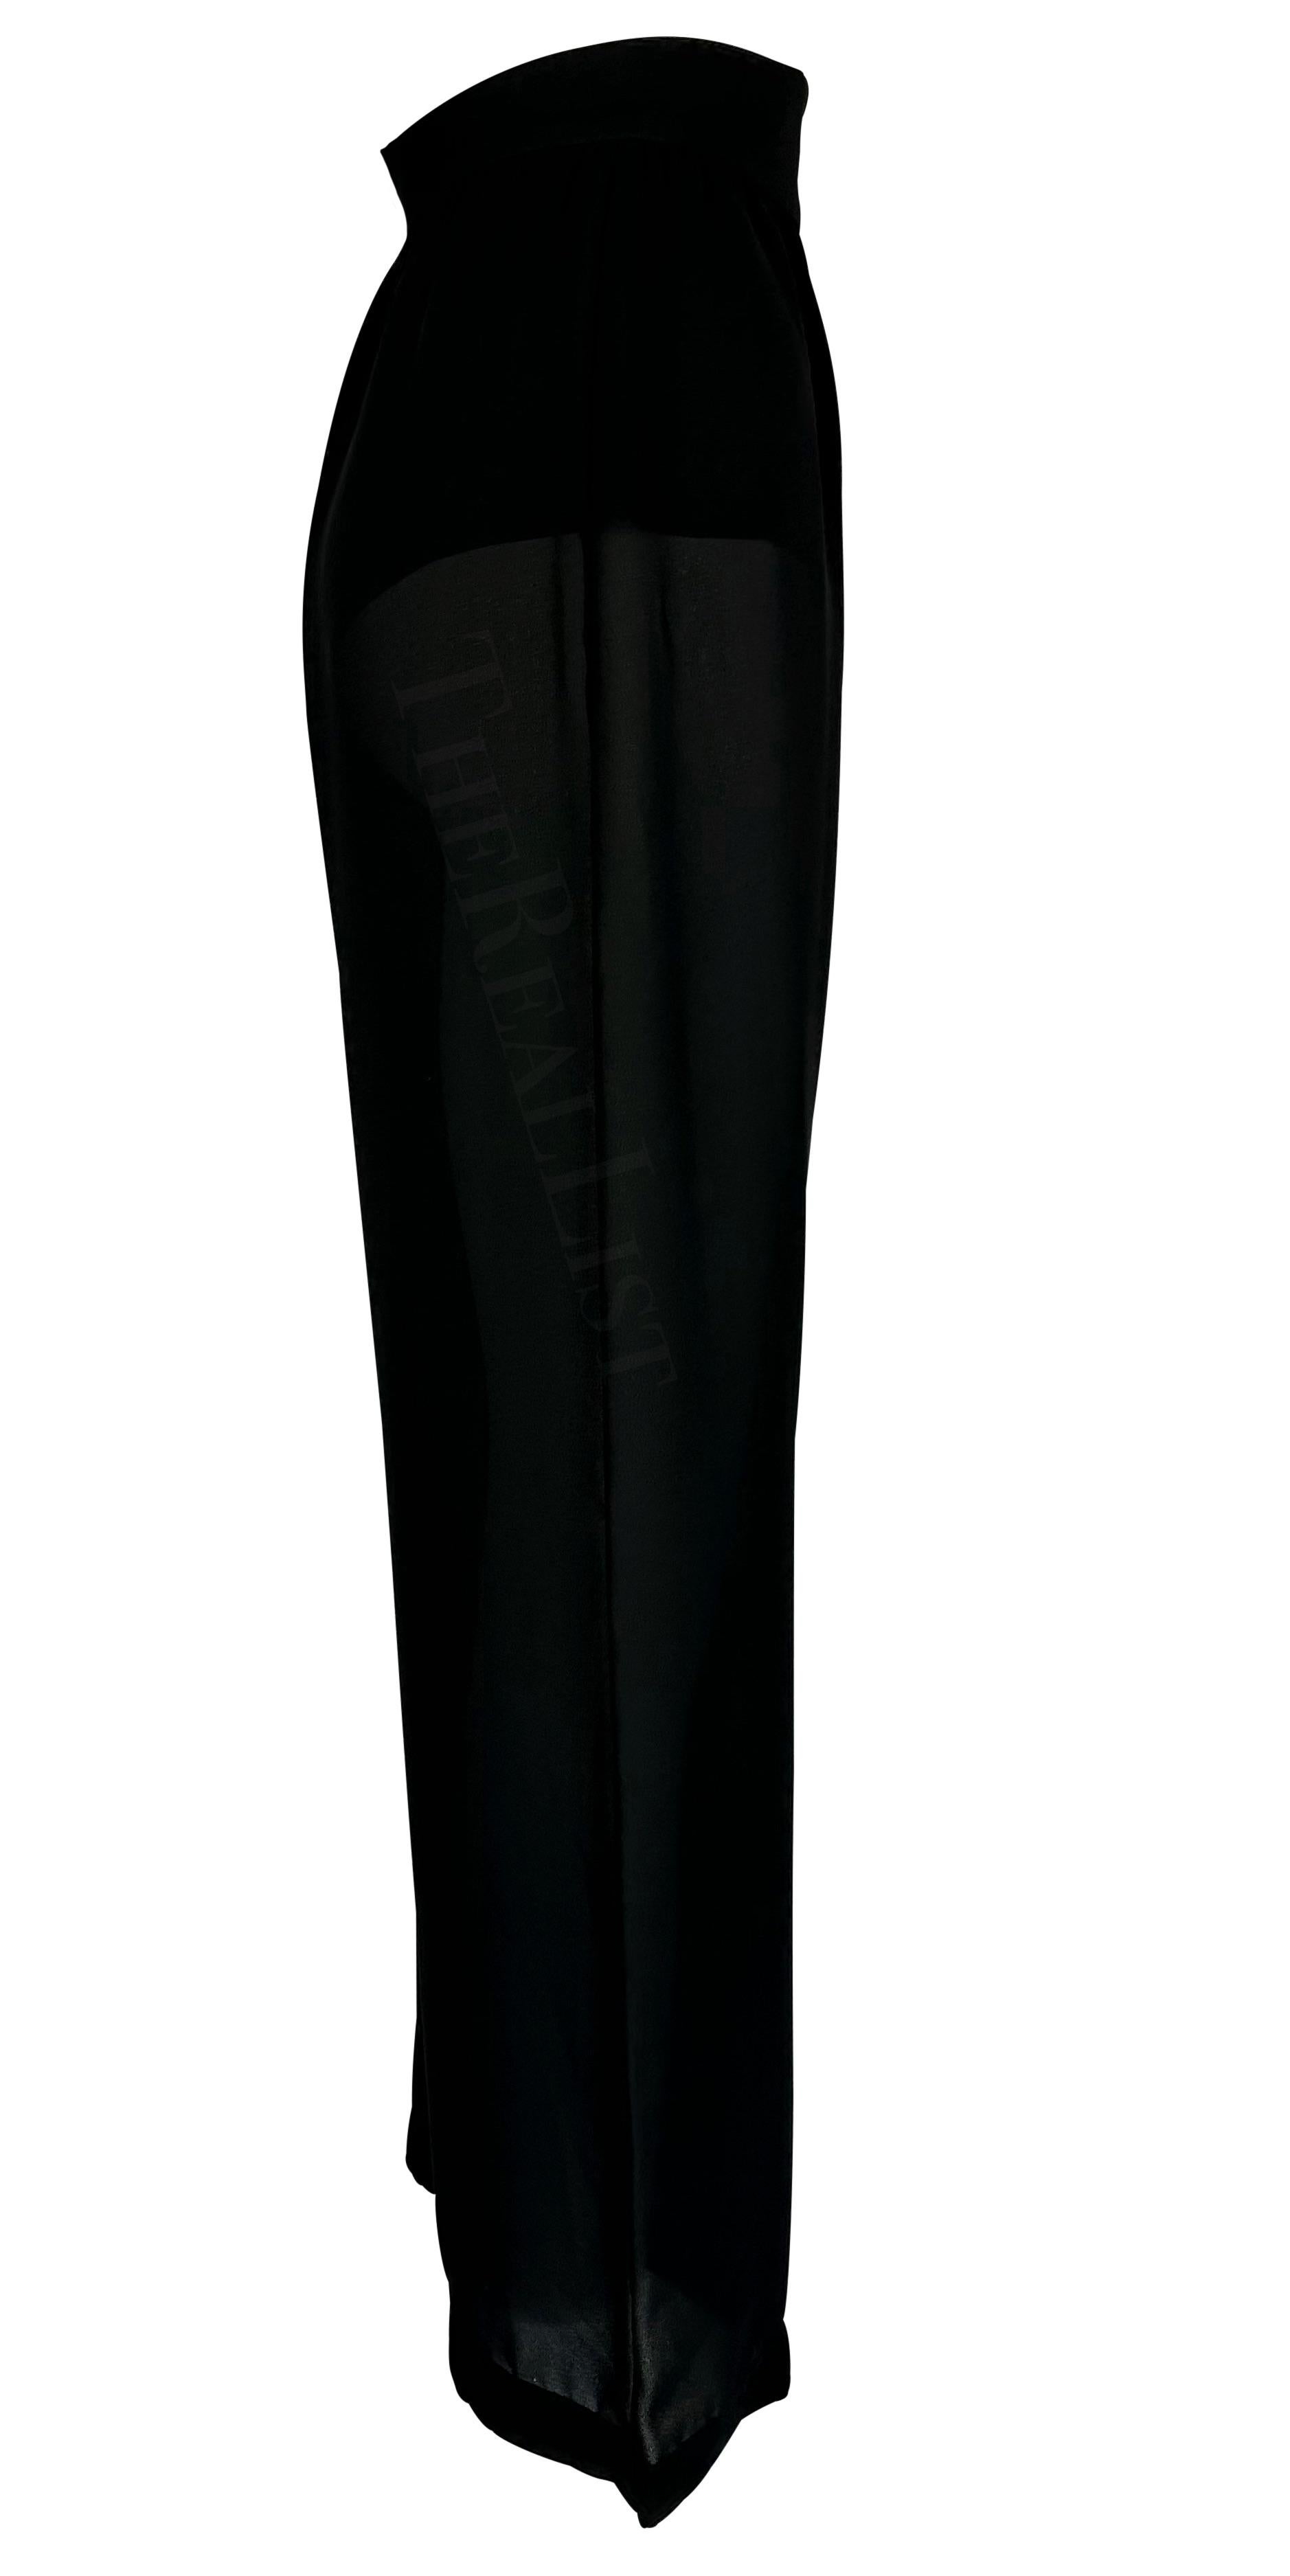 Cruise 1999 Thierry Mugler Sheer Black Lingerie Style Wide Leg High Waist Pants For Sale 2